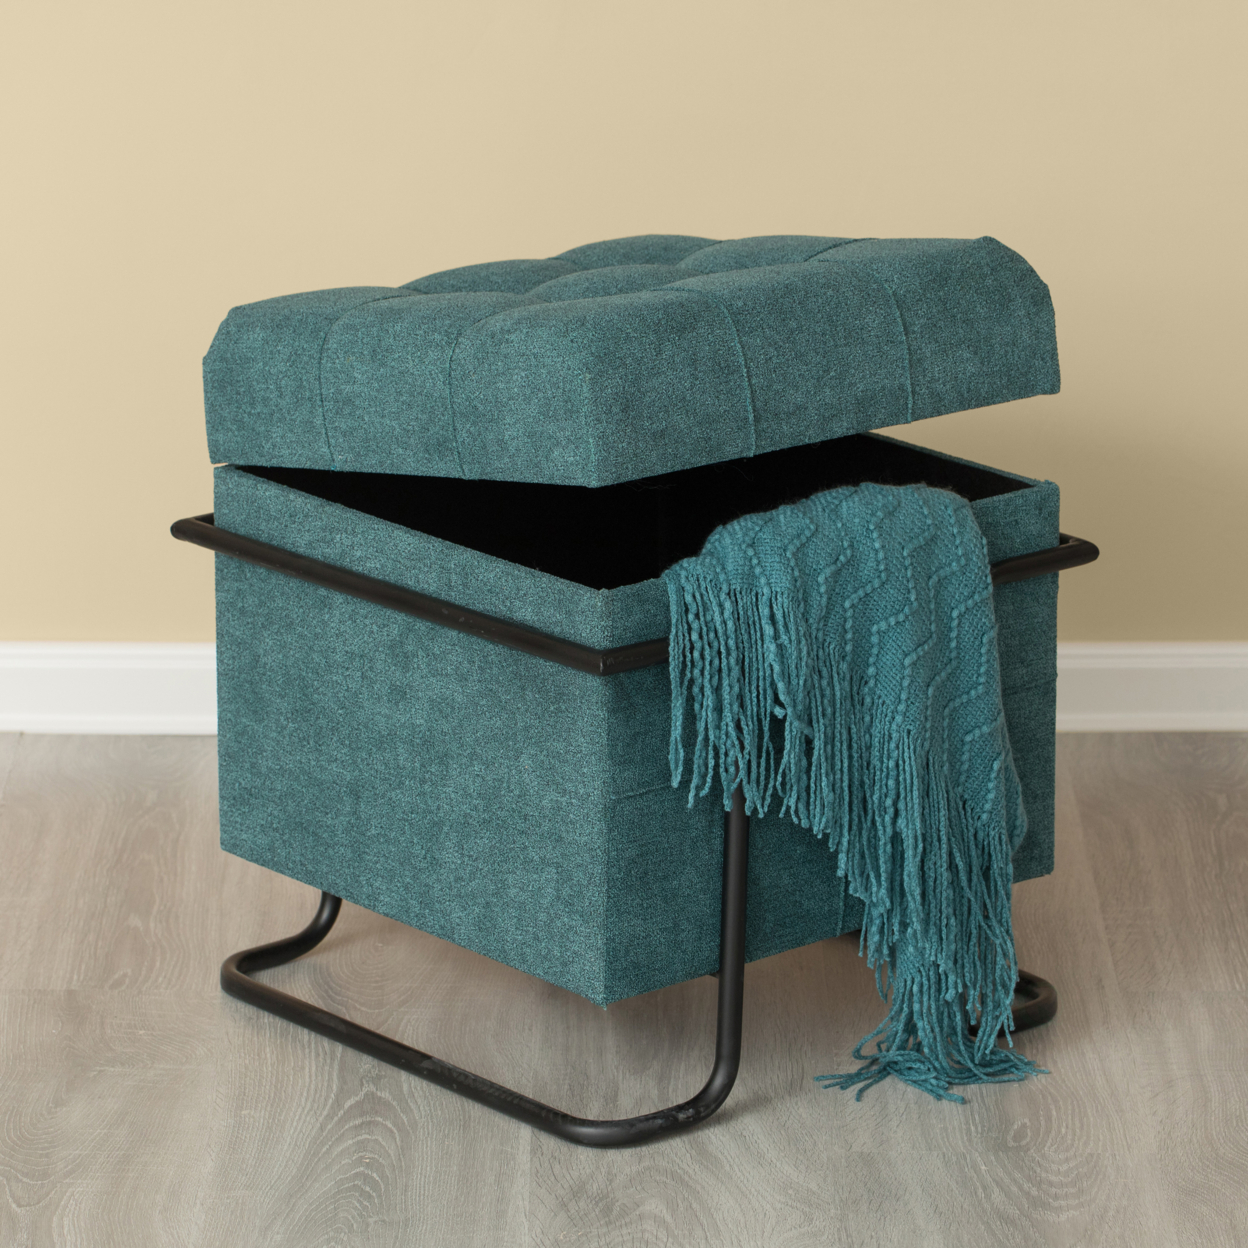 Square Fabric Storage Ottoman With Black Metal Frame - Yellow